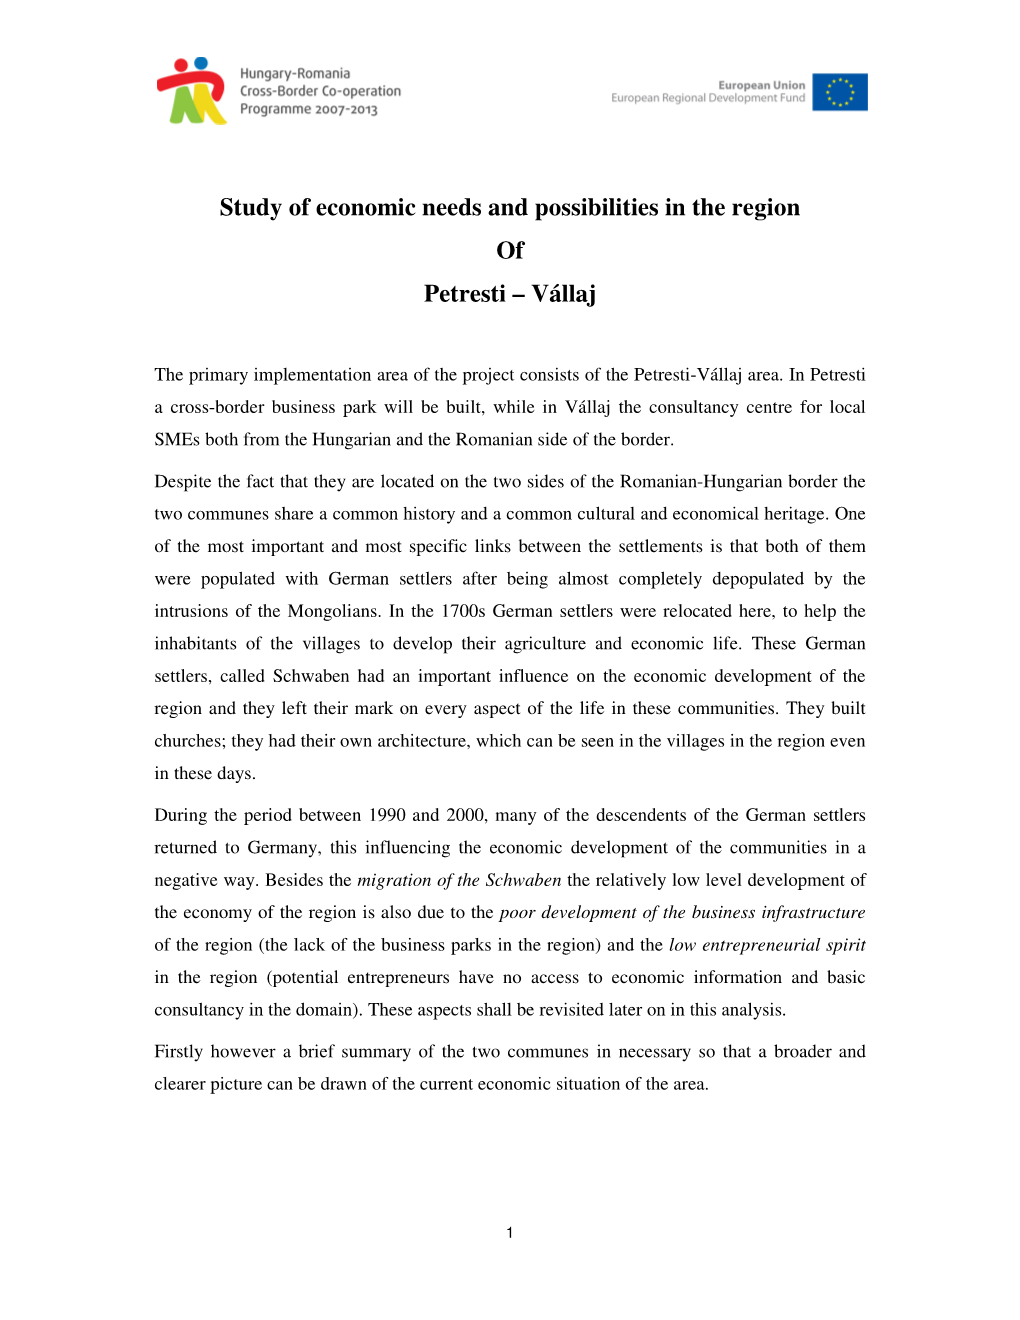 Study of Economic Needs and Possibilities in the Region of Petresti – Vállaj